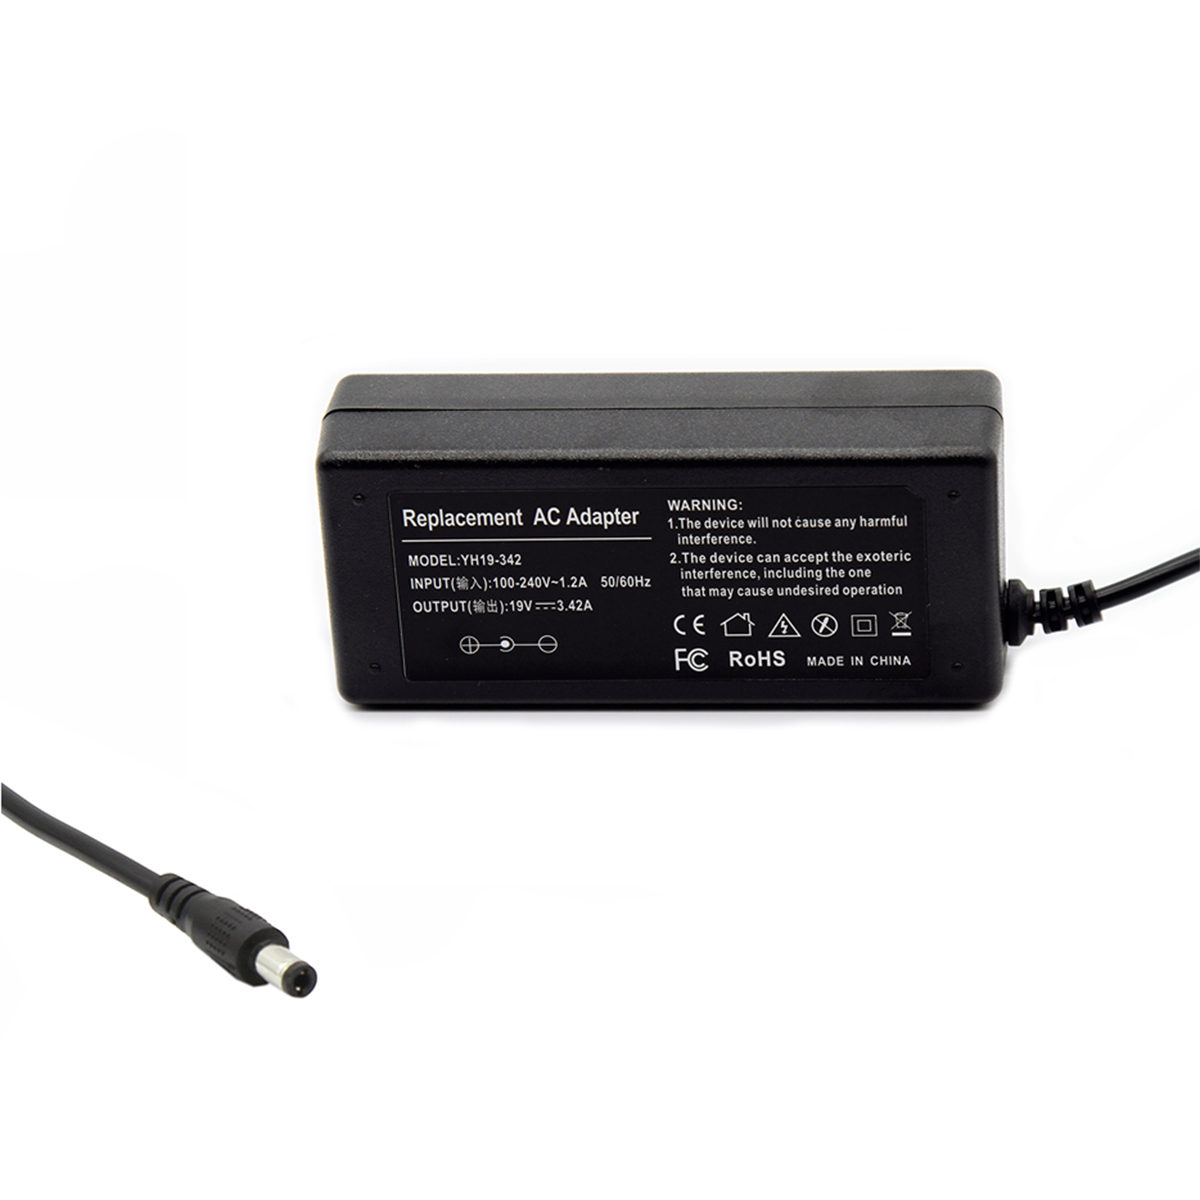 Power-Supply-55-x-25-Interface-19V-Power-Adapter-for-SQ-D60-SQ001-Soldering-Station-EUUSUKAU-Plug-1789697-5